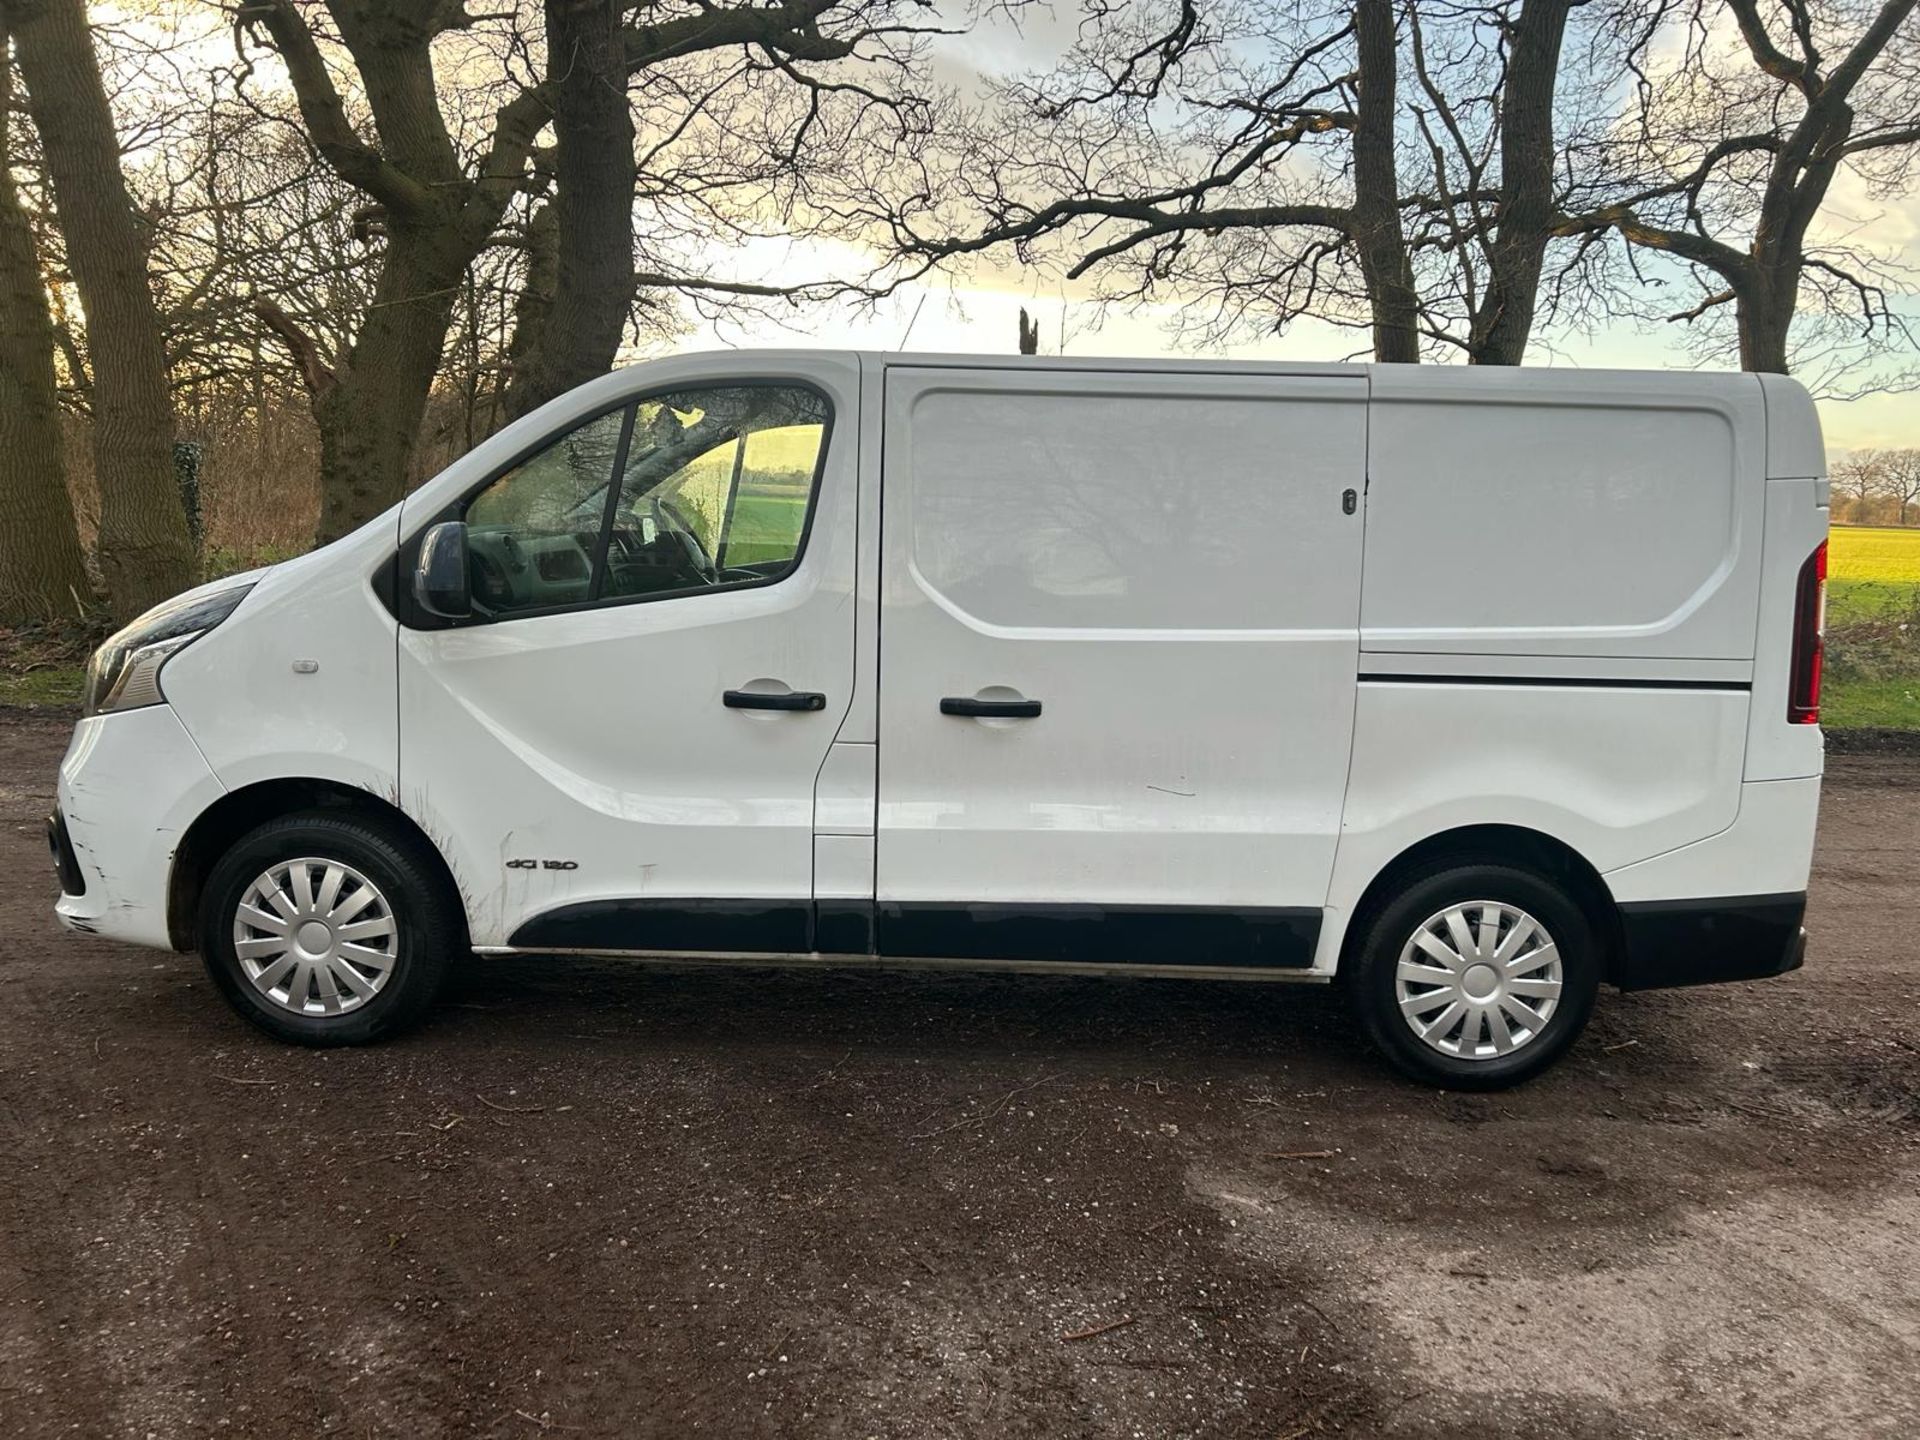 2018 18 NISSAN NV300 PANEL VAN - 106K MILES - AIR CON - EURO 6 - PLY LINED - Image 4 of 11